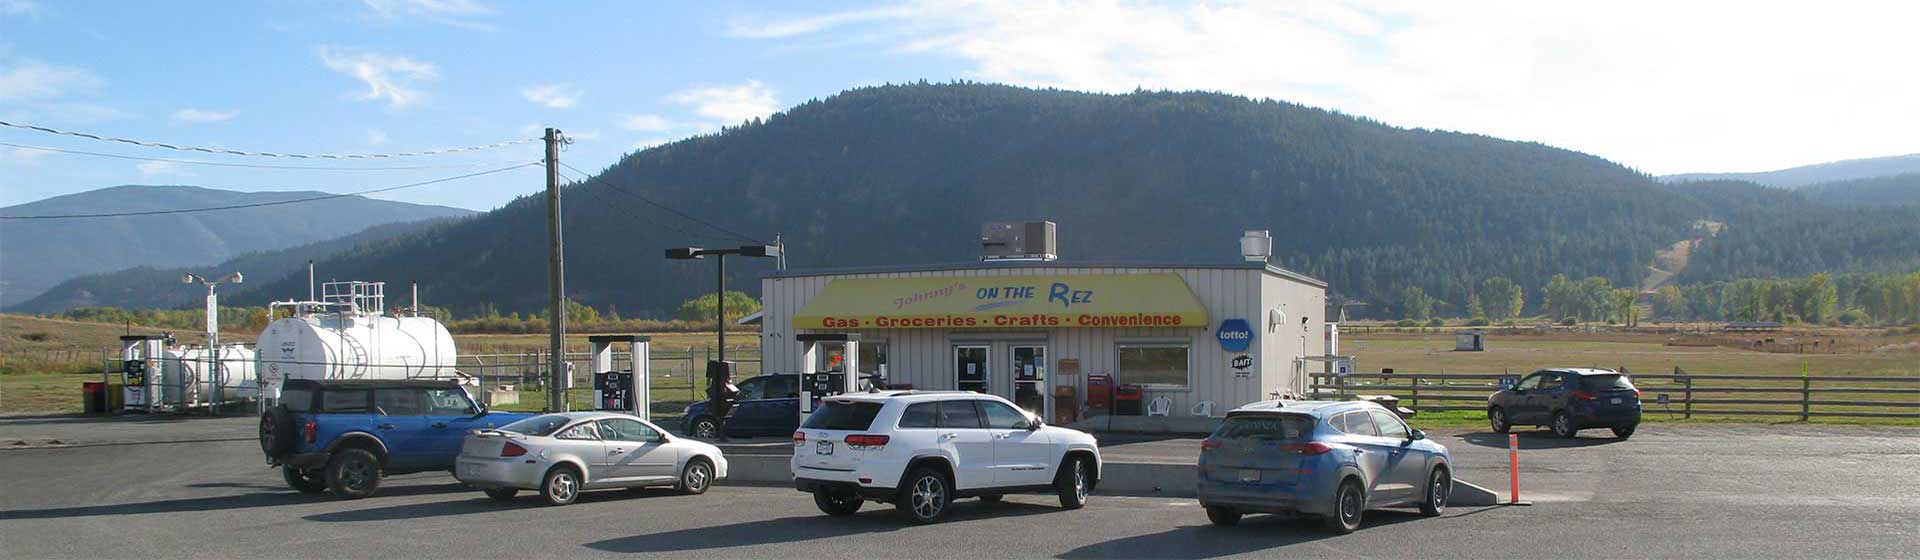 Johnny's on the Rez Convenience Store Located in Merritt, BC next to the Lower Nicola